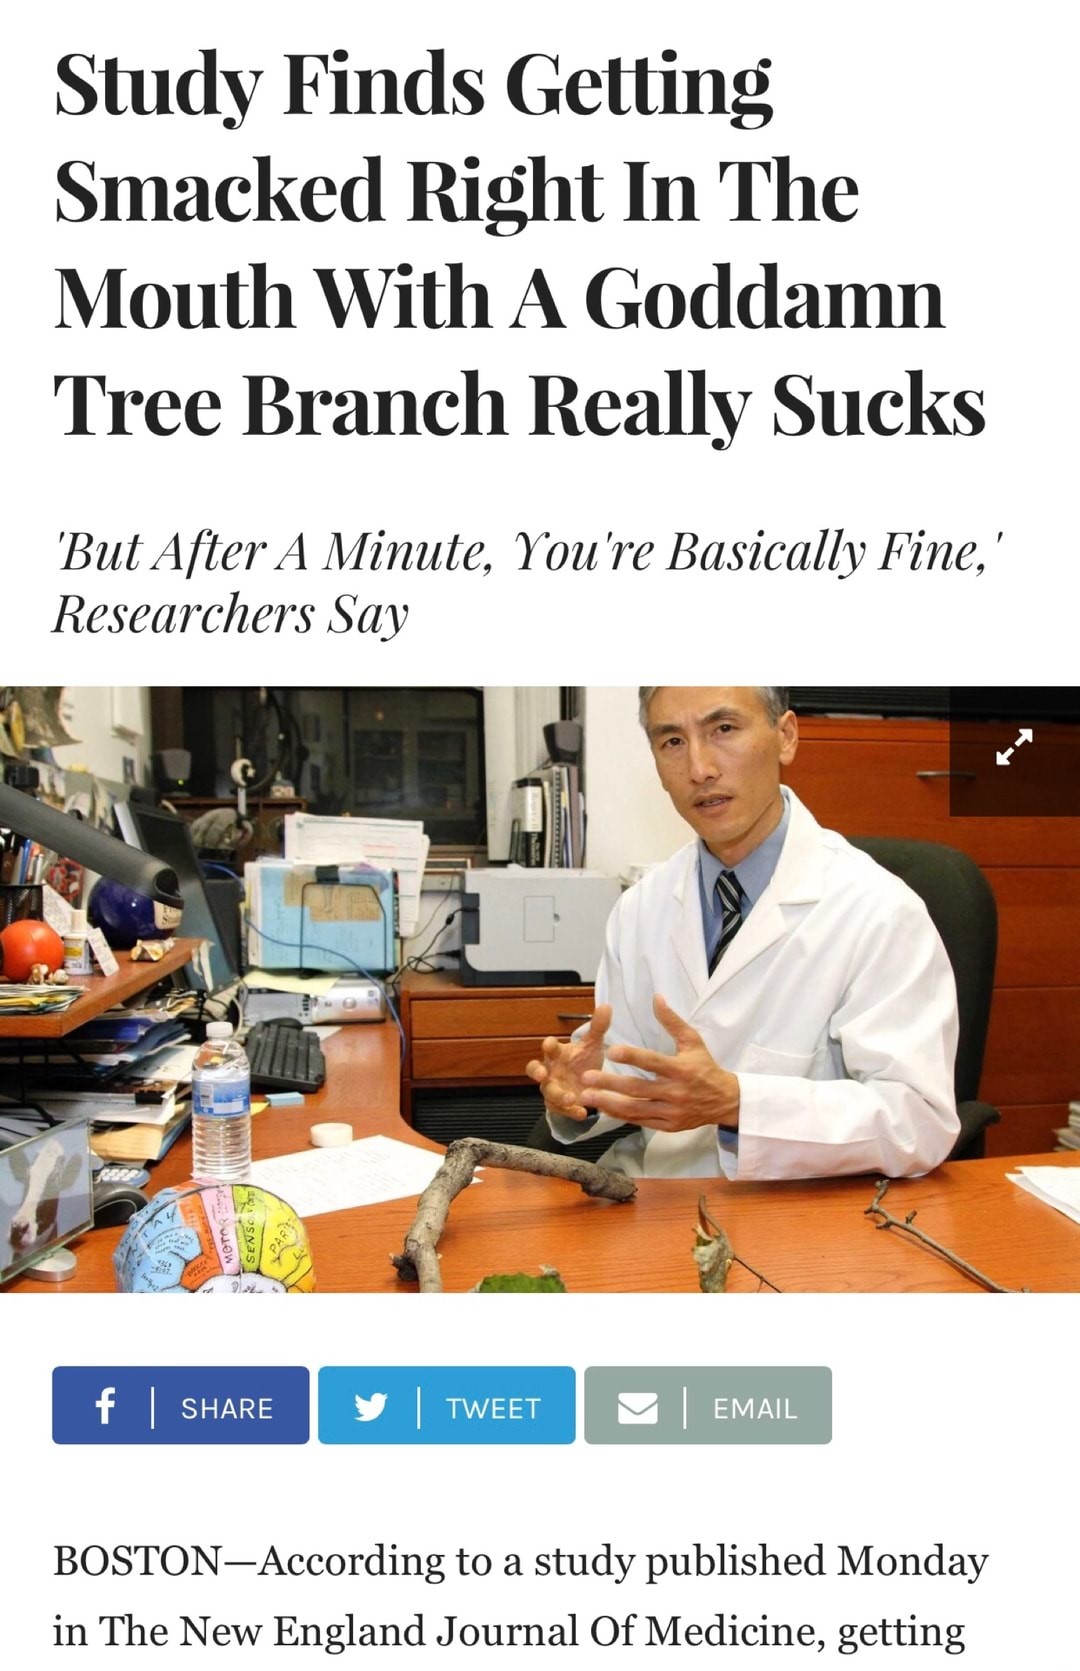 study finds that hearing an opposing viewpoint causes no harm - Study Finds Getting Smacked Right In The Mouth With A Goddamn Tree Branch Really Sucks 'But After A Minute, You're Basically Fine,' Researchers Say Motor Senso f Y Tweet Email BOSTONAccording